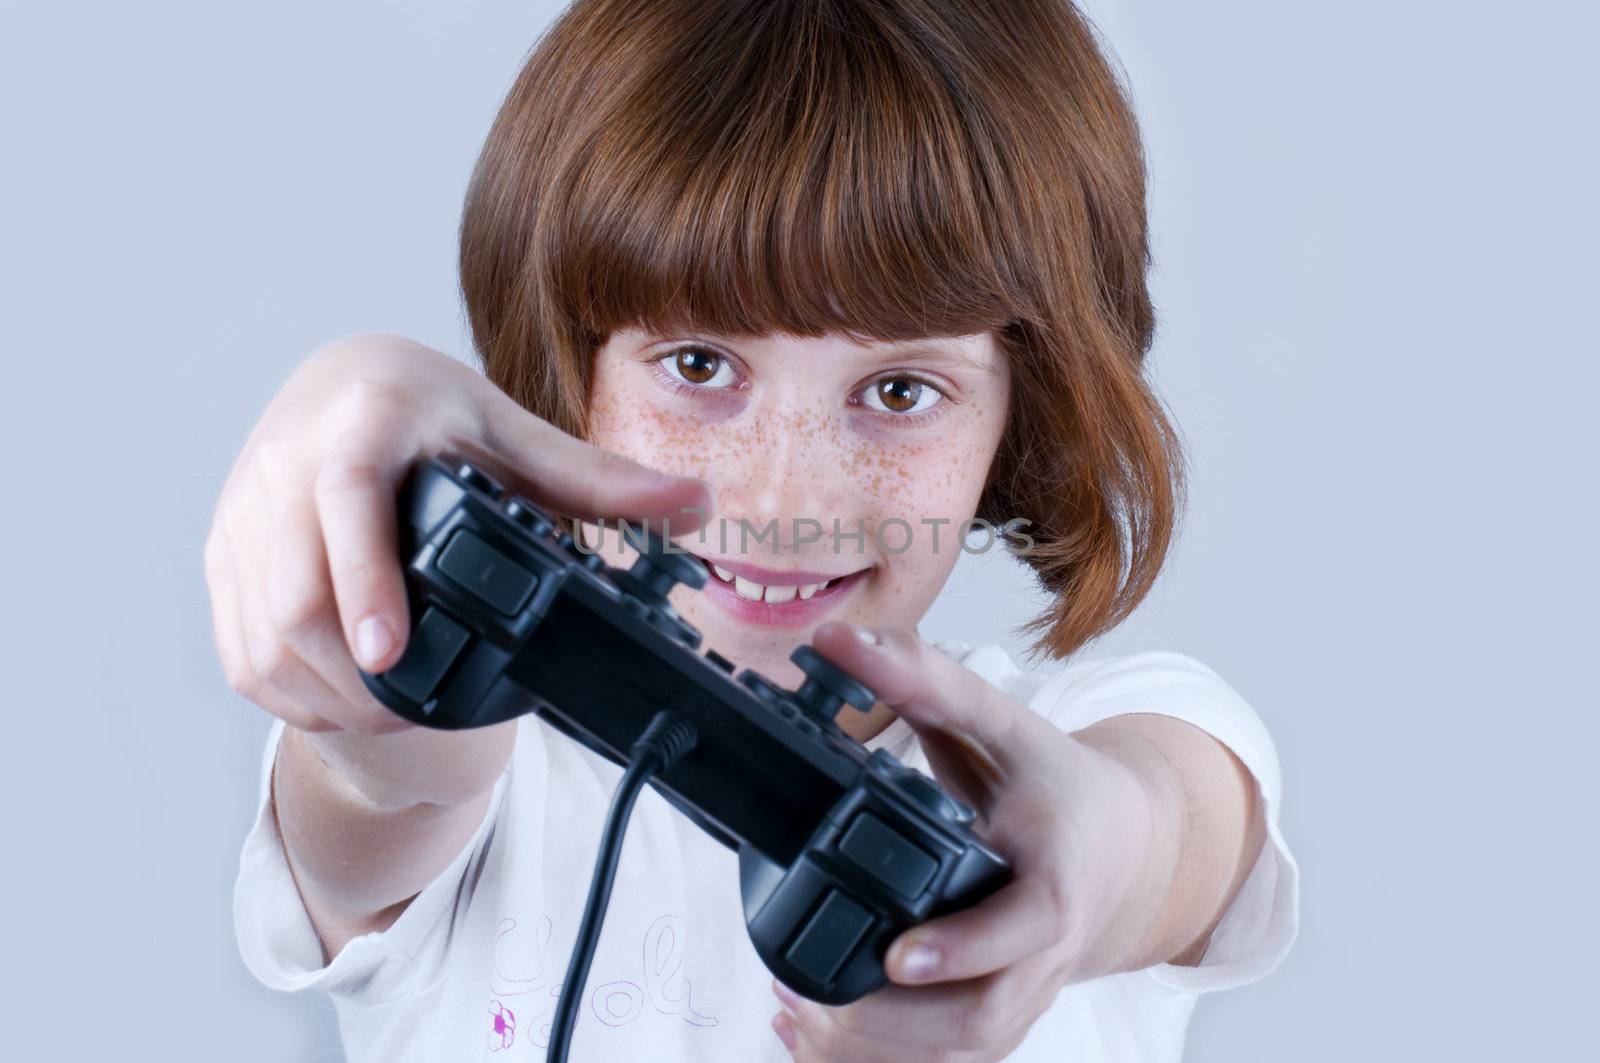 Picture of a young with freckles playing games.